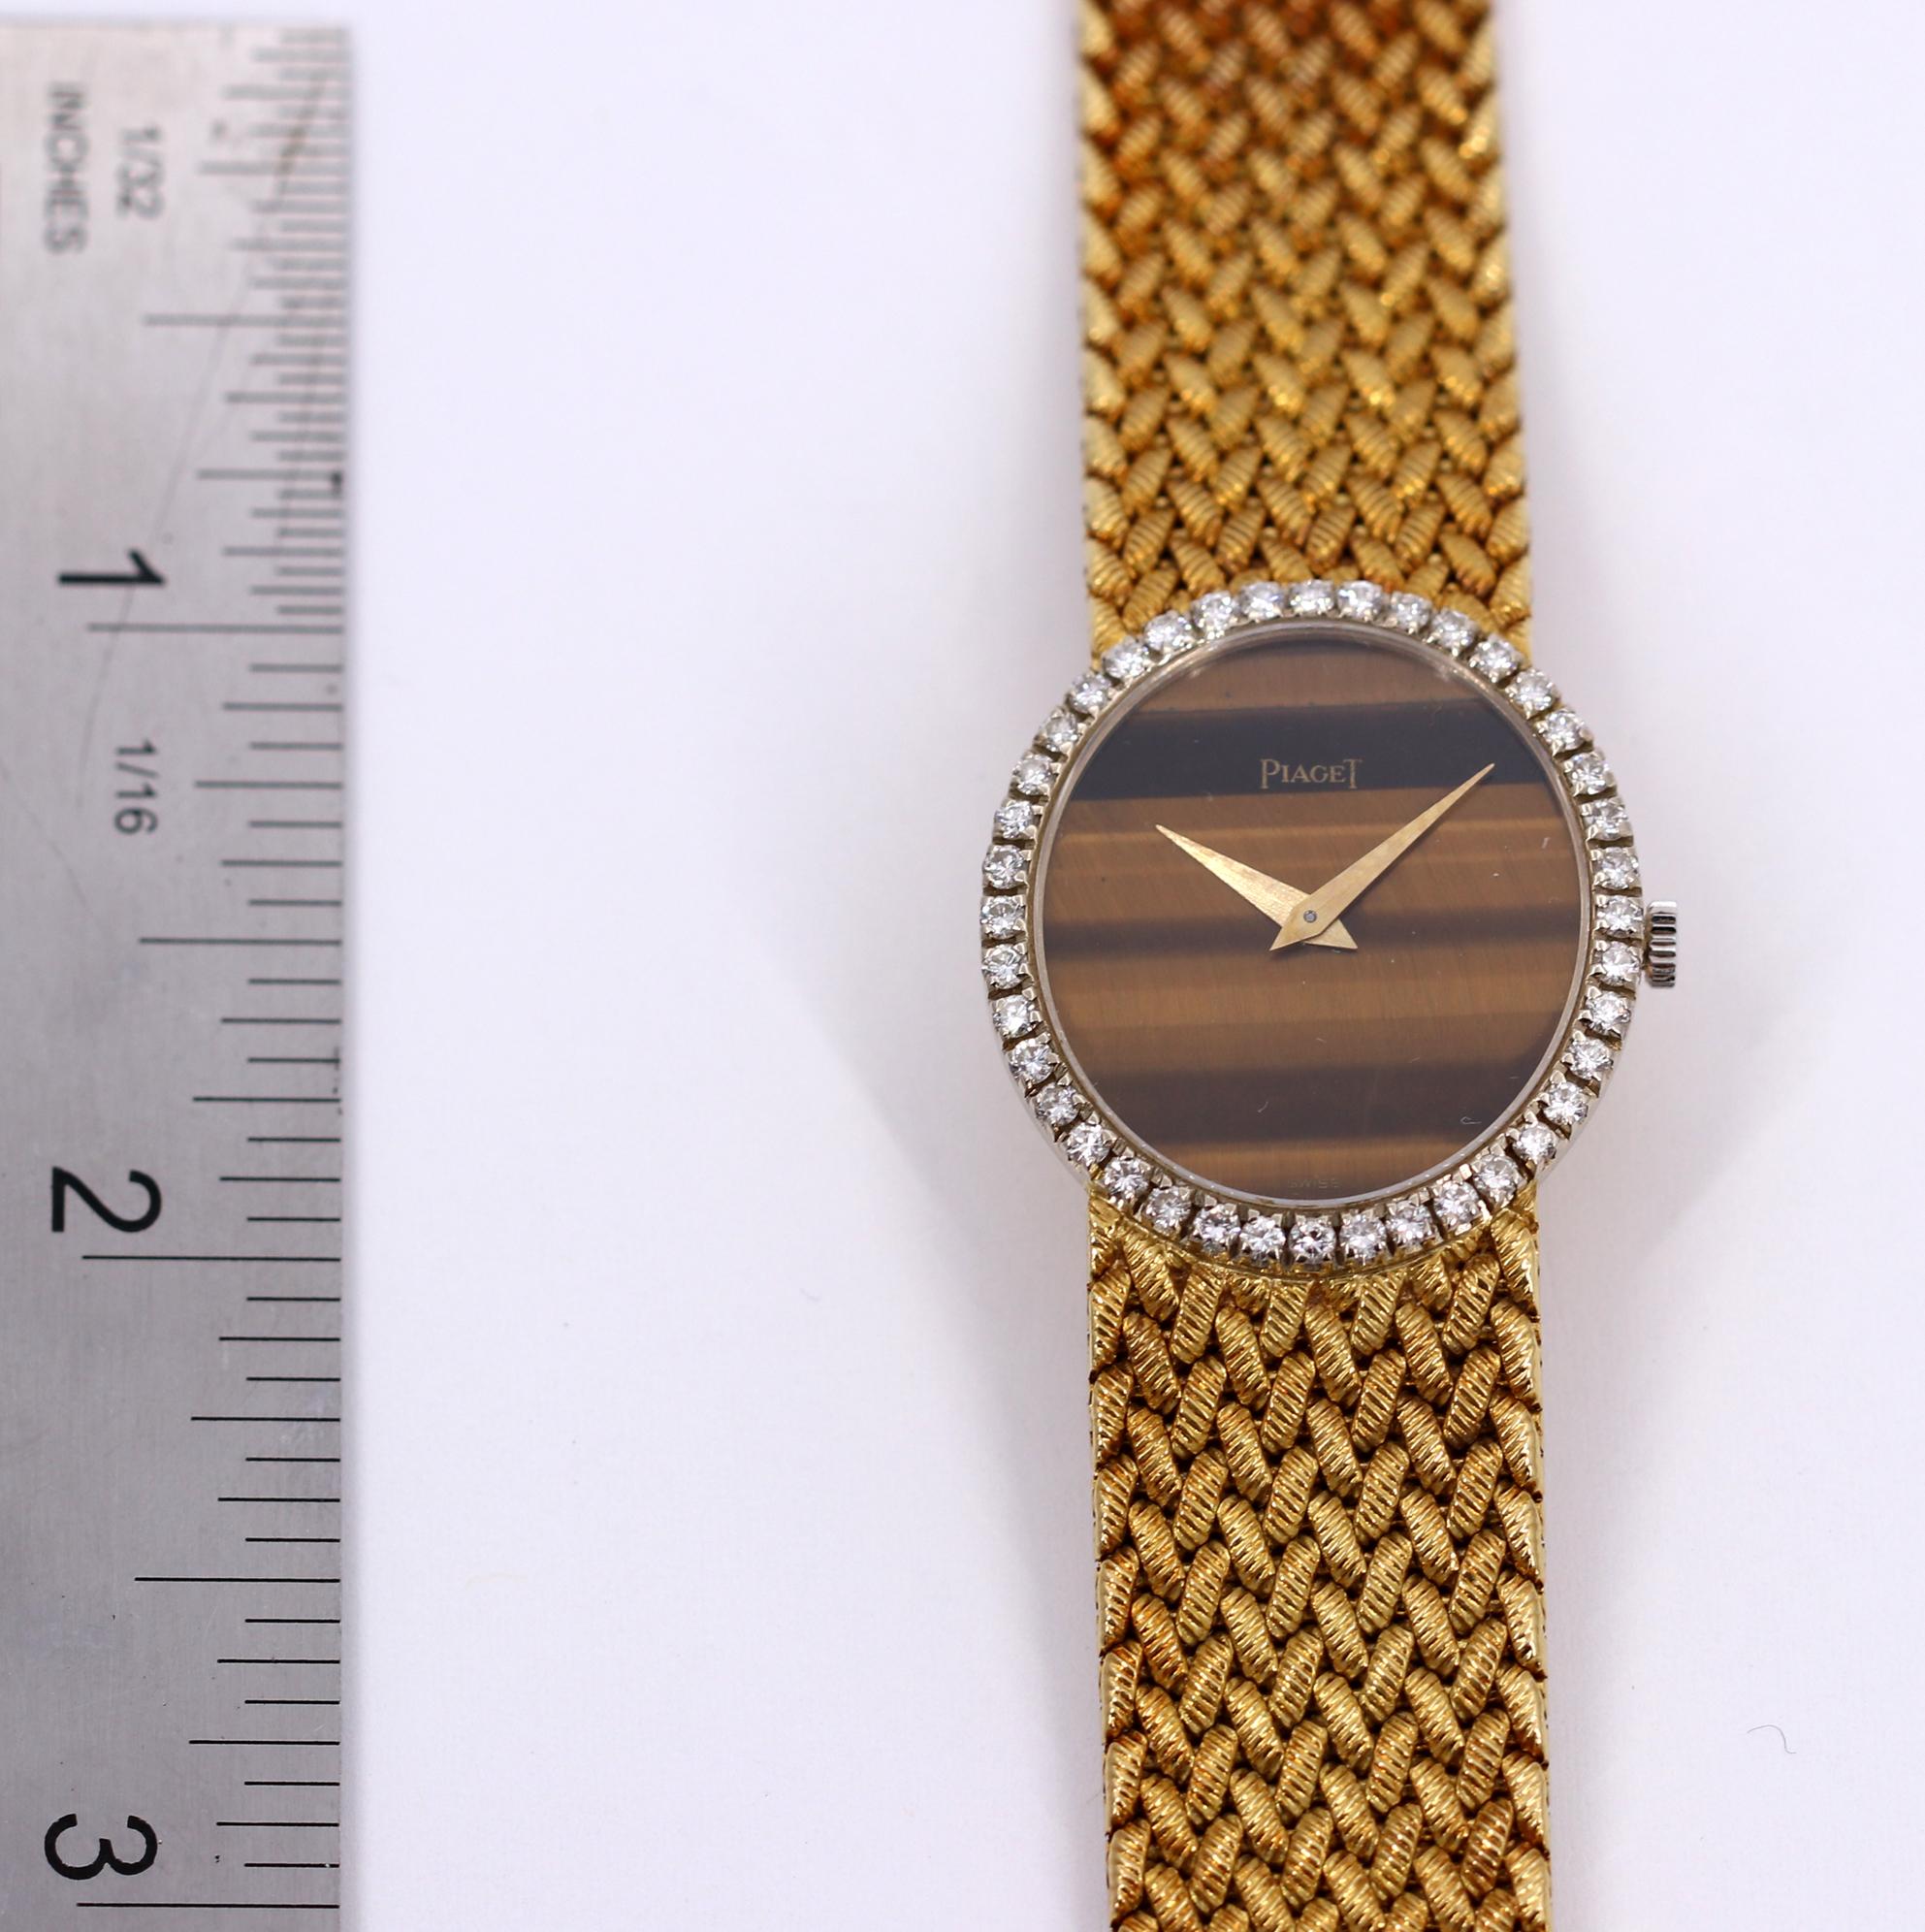 Yellow Gold Piaget Watch with Diamond Bezel and Oval Tiger's Eye Dial 1